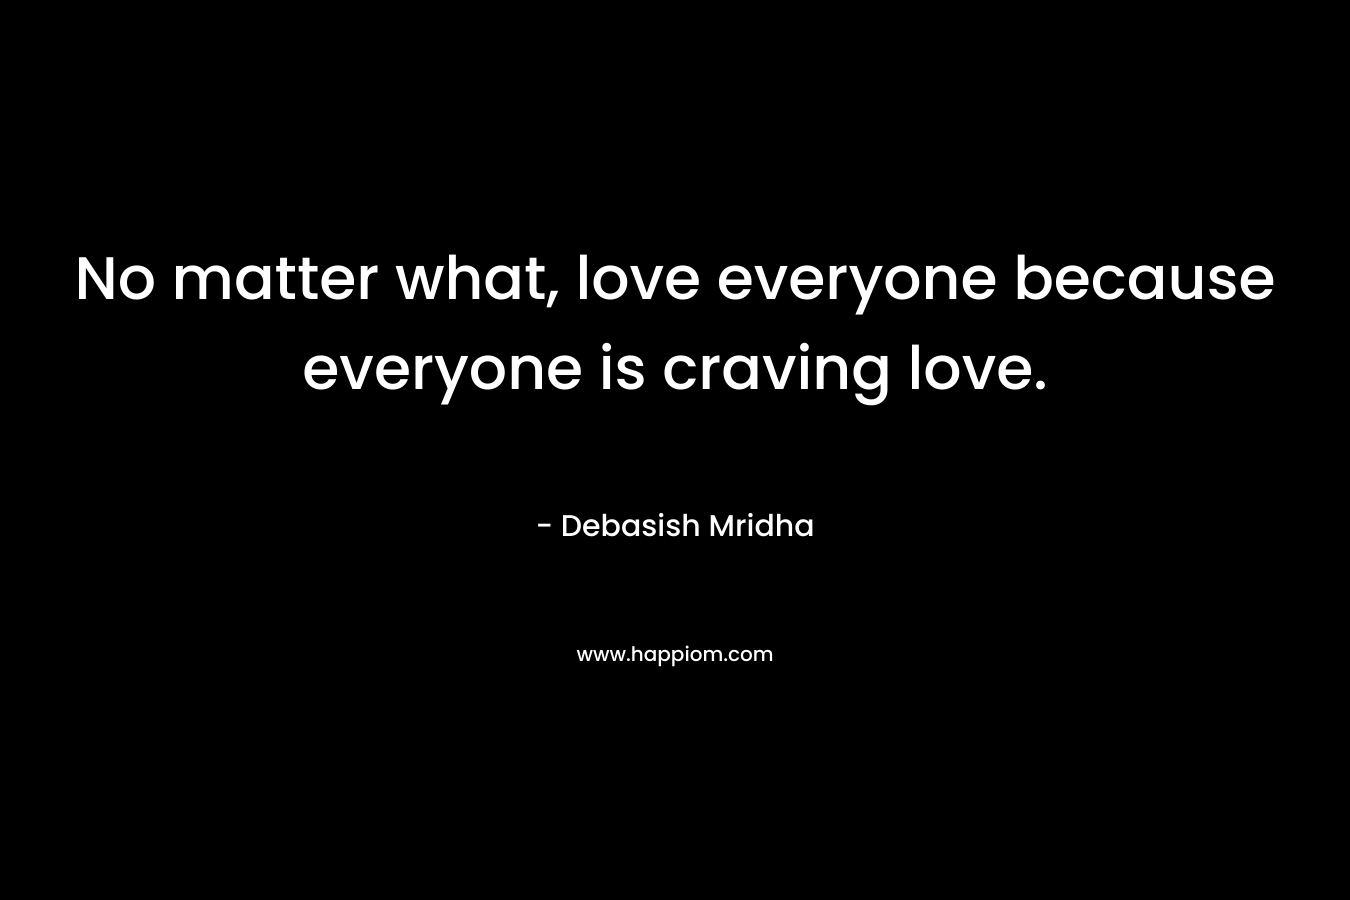 No matter what, love everyone because everyone is craving love.